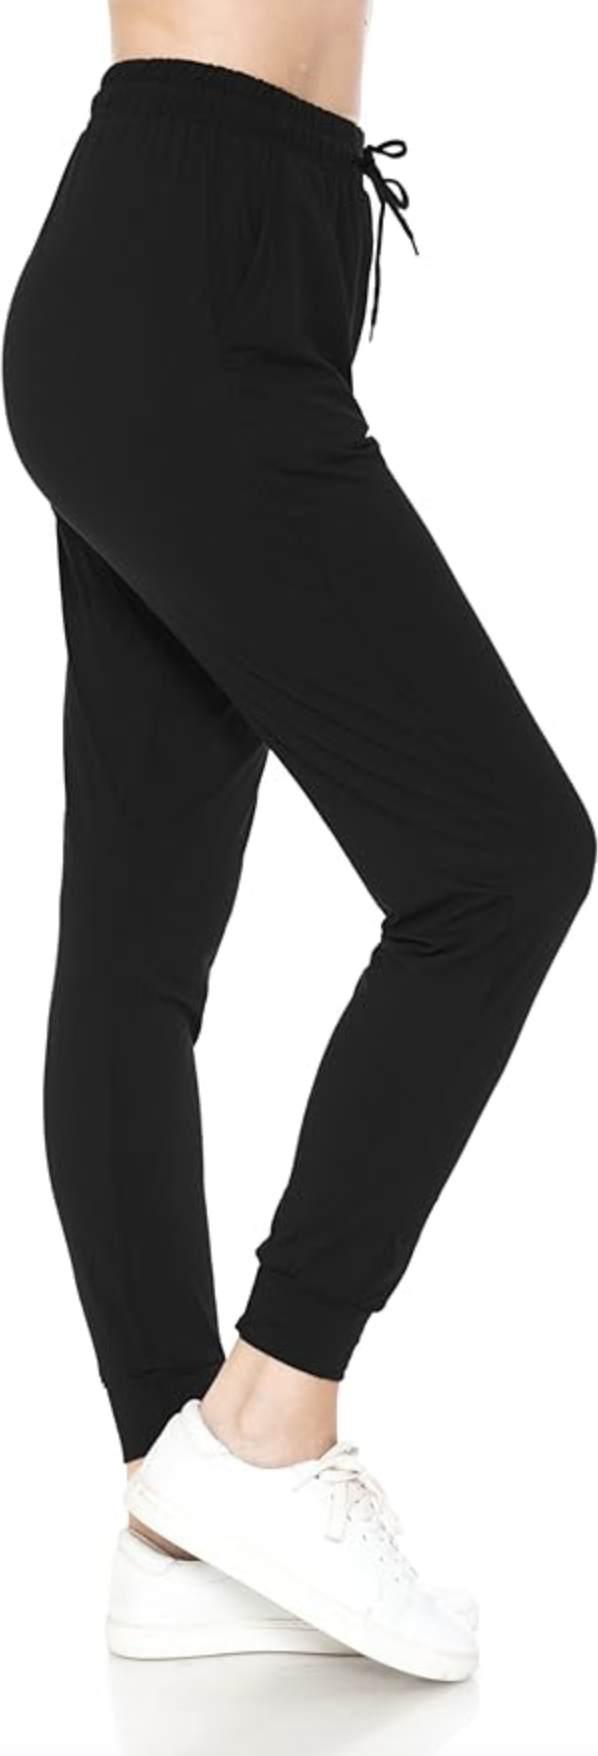 Offers for Leggings Depot Women's Relaxed-Fit Jogger Track Cuff Sweatpants